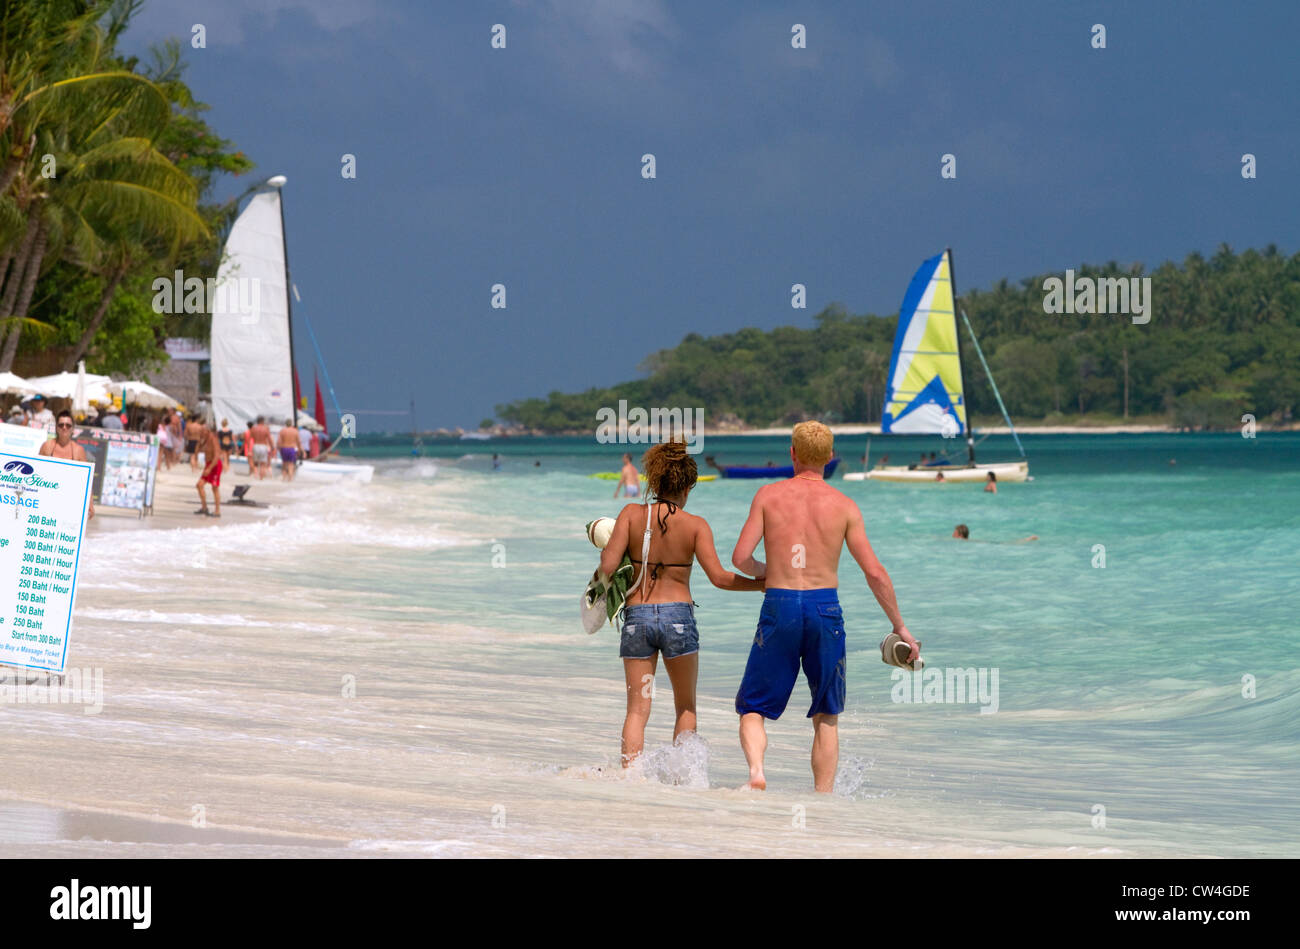 People walk hand in hand along the Gulf of Thailand at Chaweng beach on the island of Ko Samui, Thailand. Stock Photo